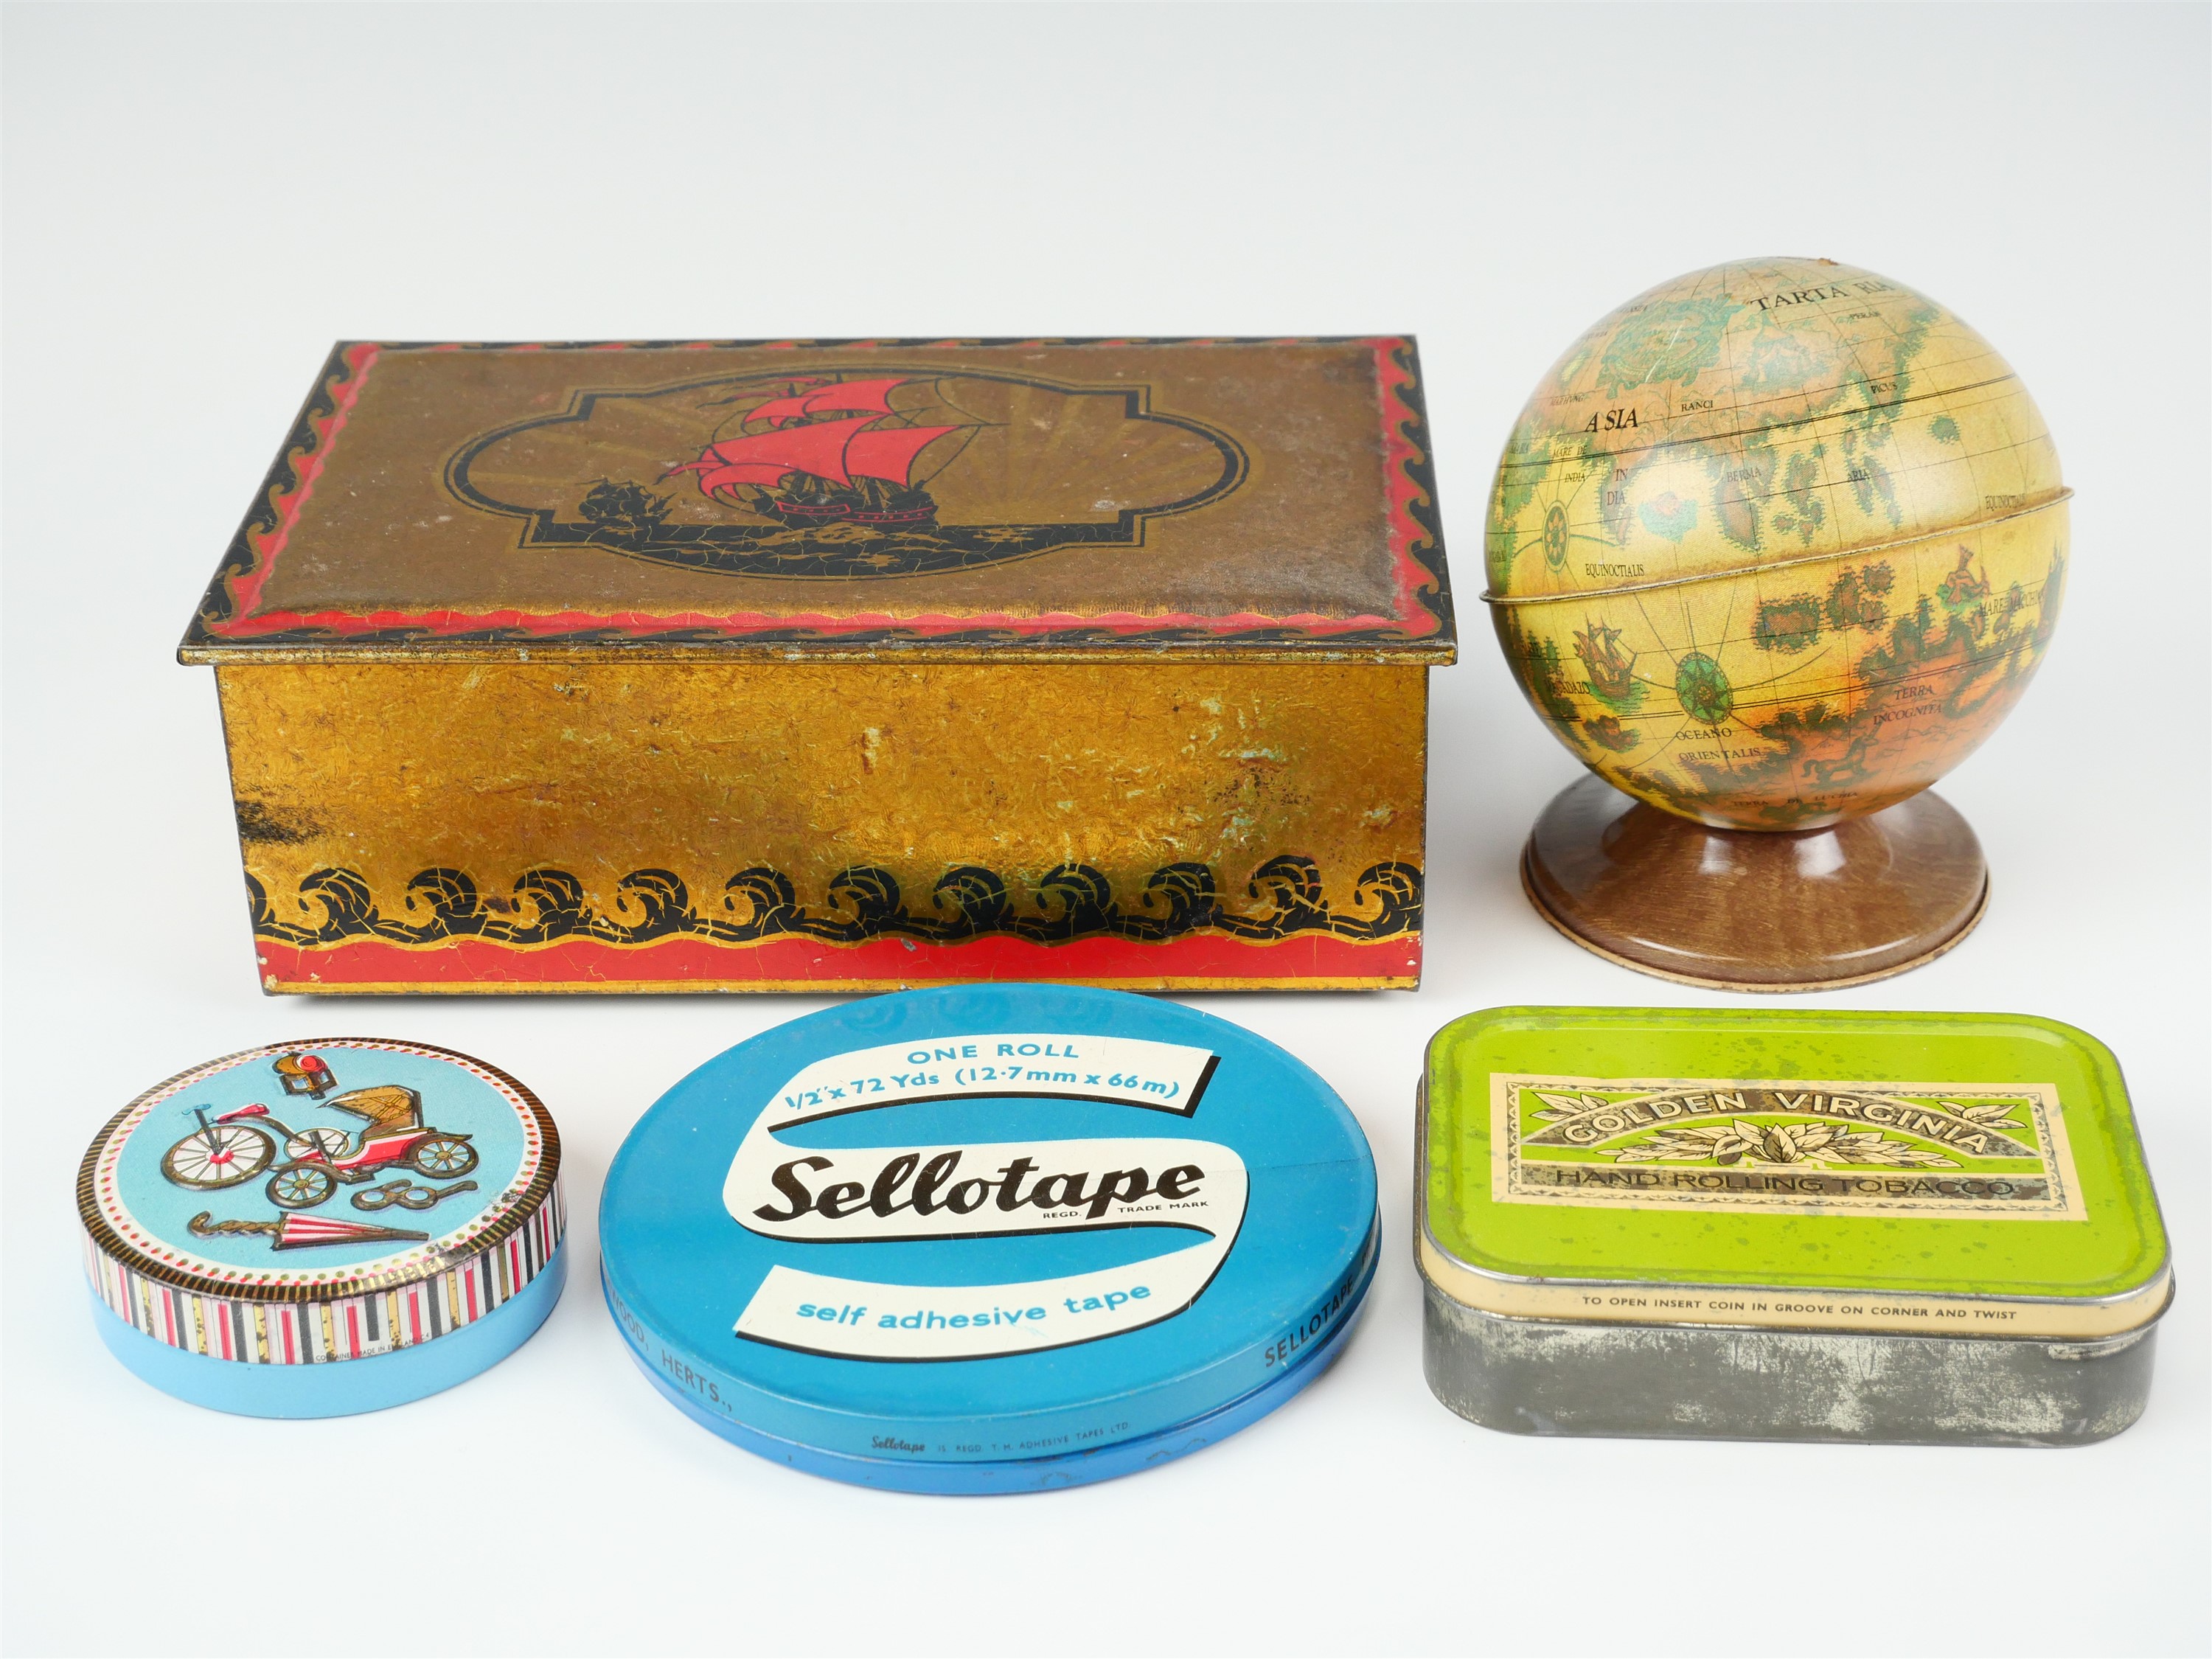 A tinplate money box in the form of a terrestrial globe, together with four printed tinplate